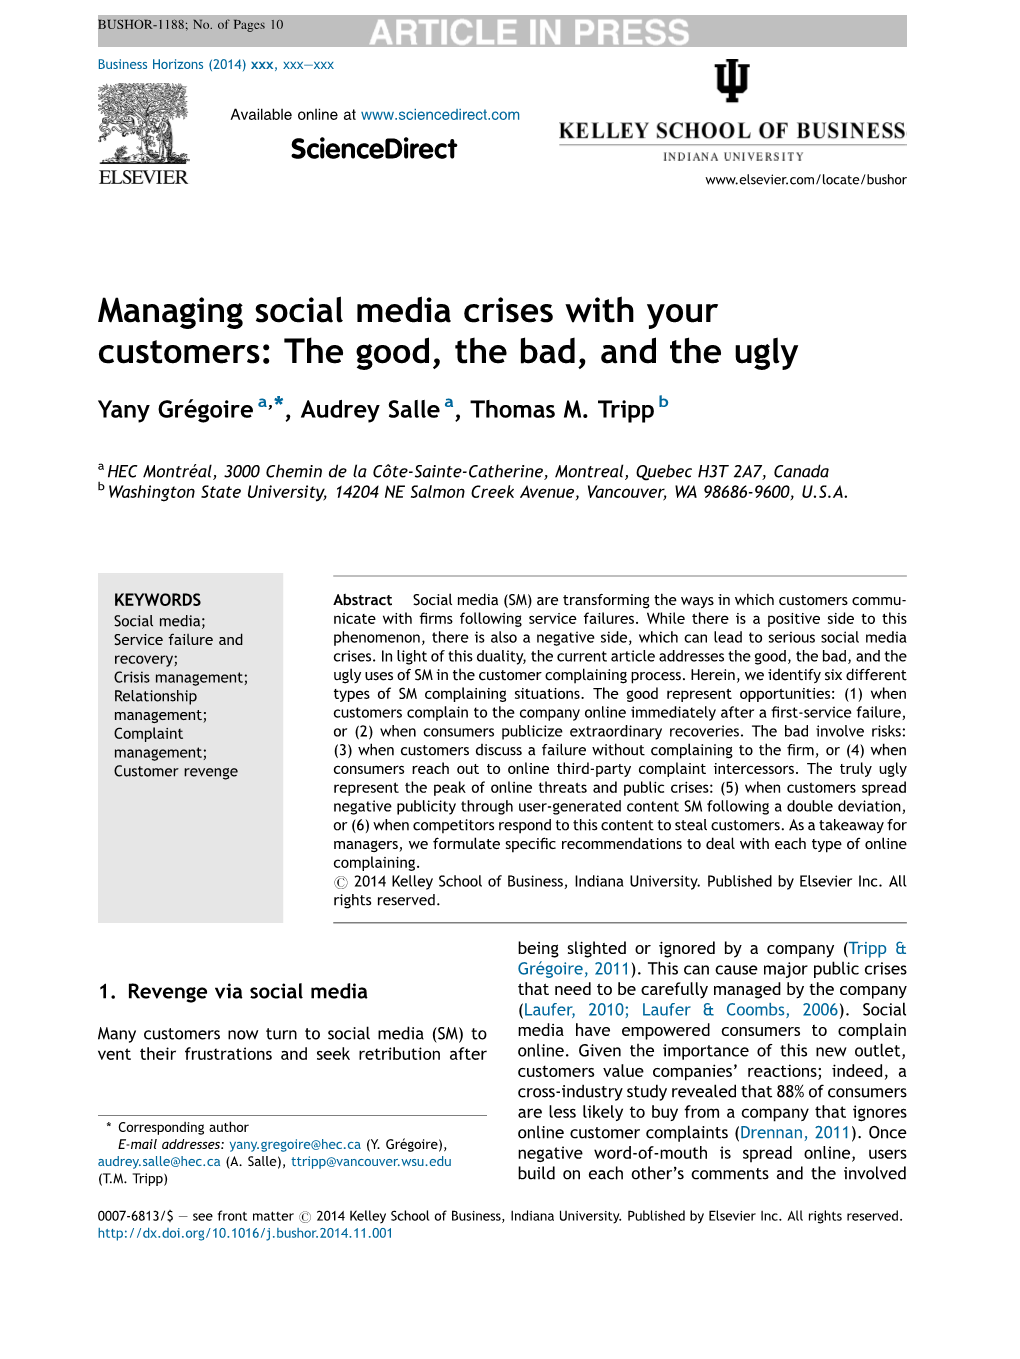 Managing Social Media Crises with Your Customers: the Good, the Bad, and the Ugly 3